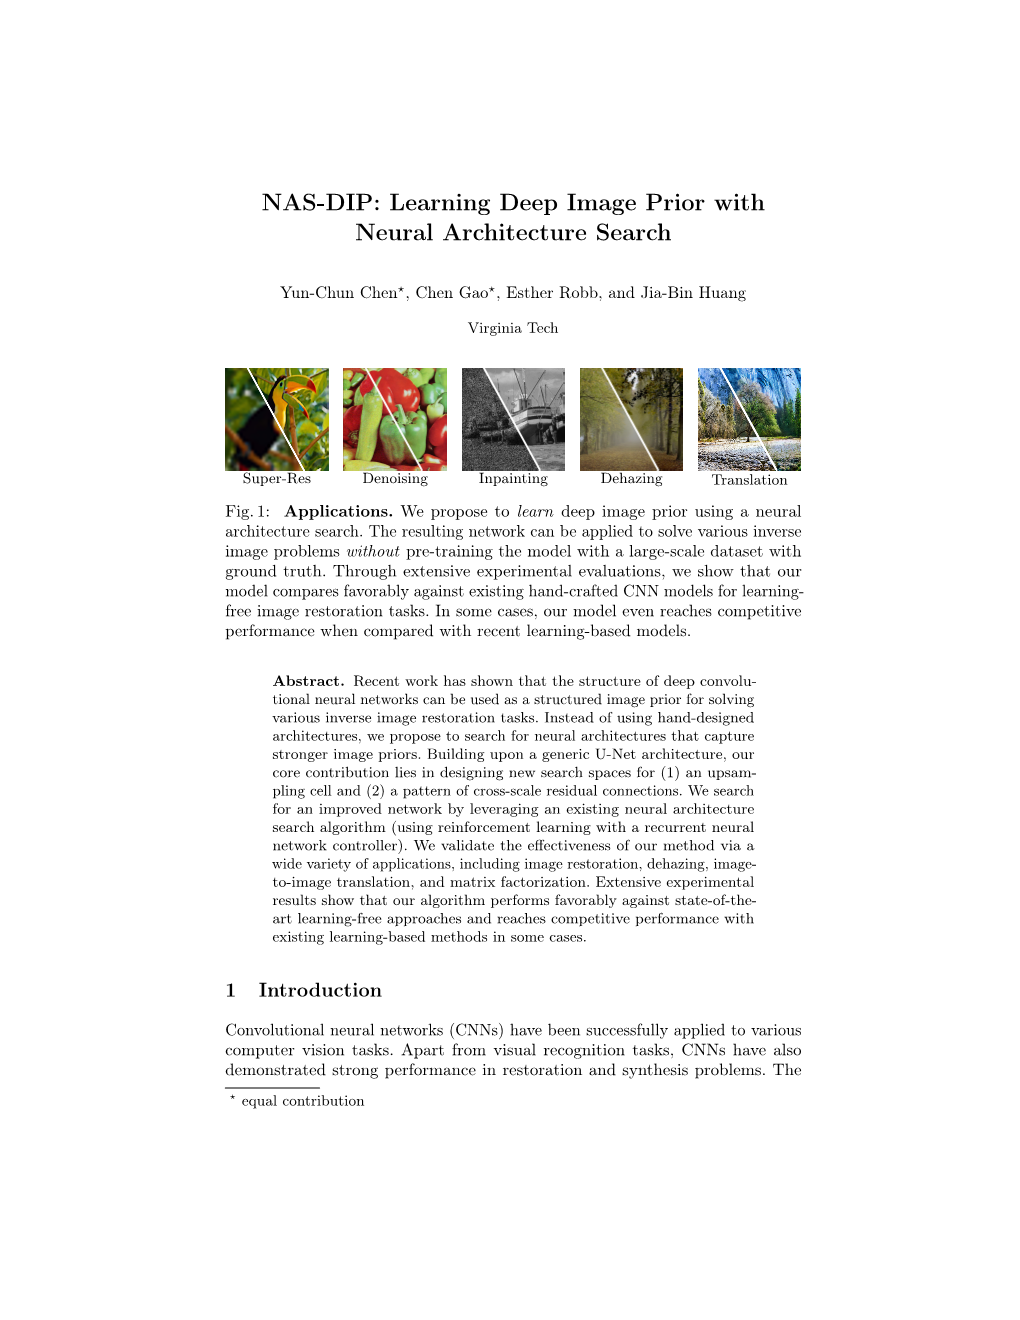 NAS-DIP: Learning Deep Image Prior with Neural Architecture Search